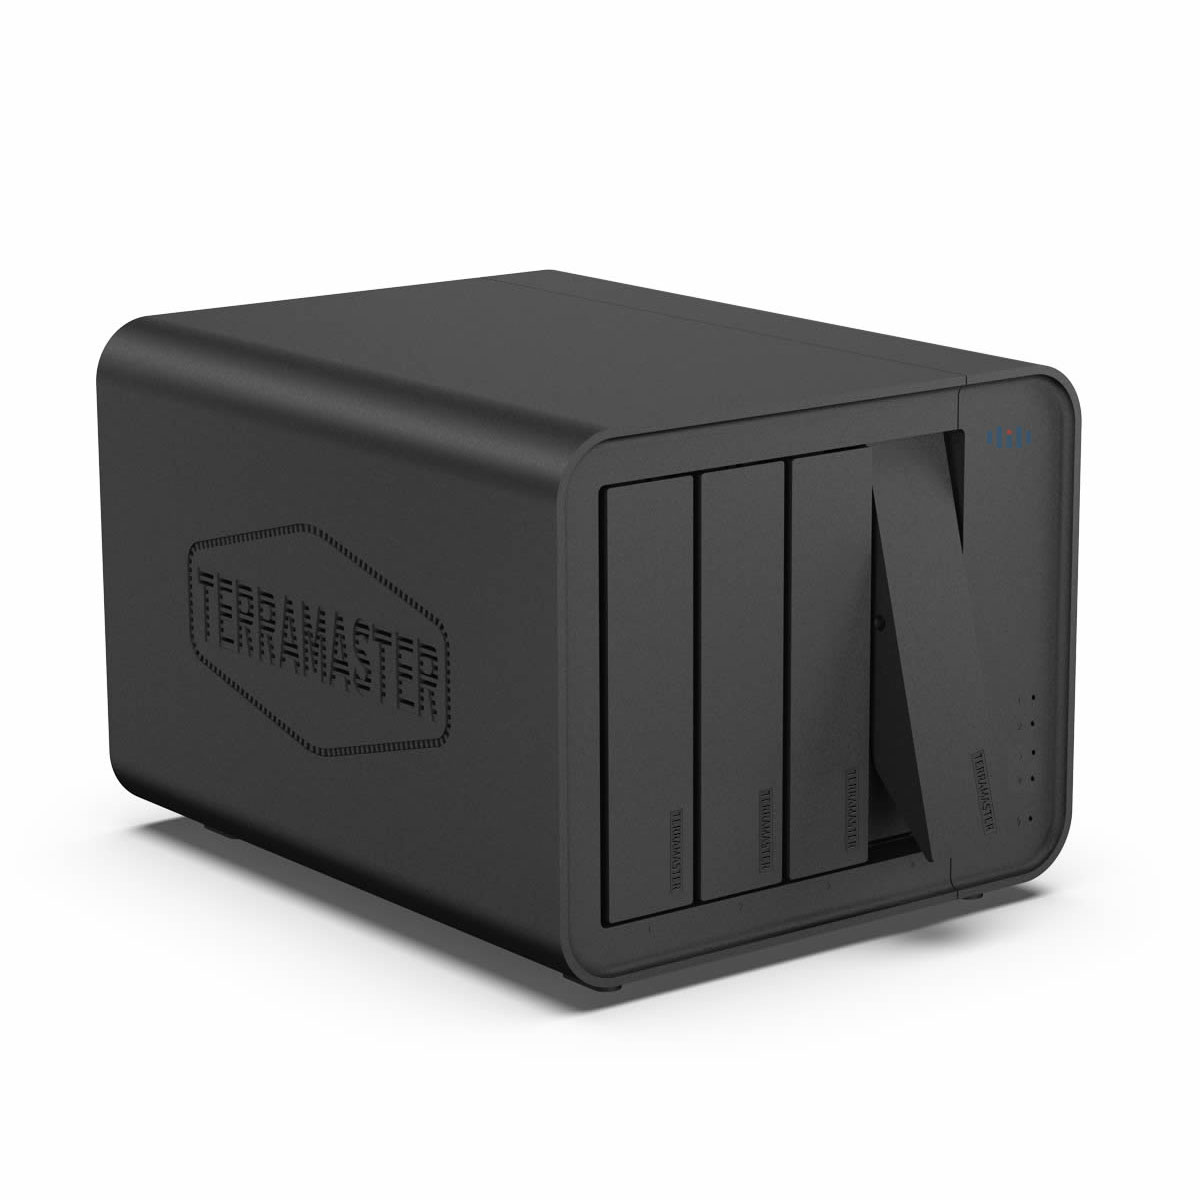 TerraMaster F4-424Pro all in one 4Bay NAS